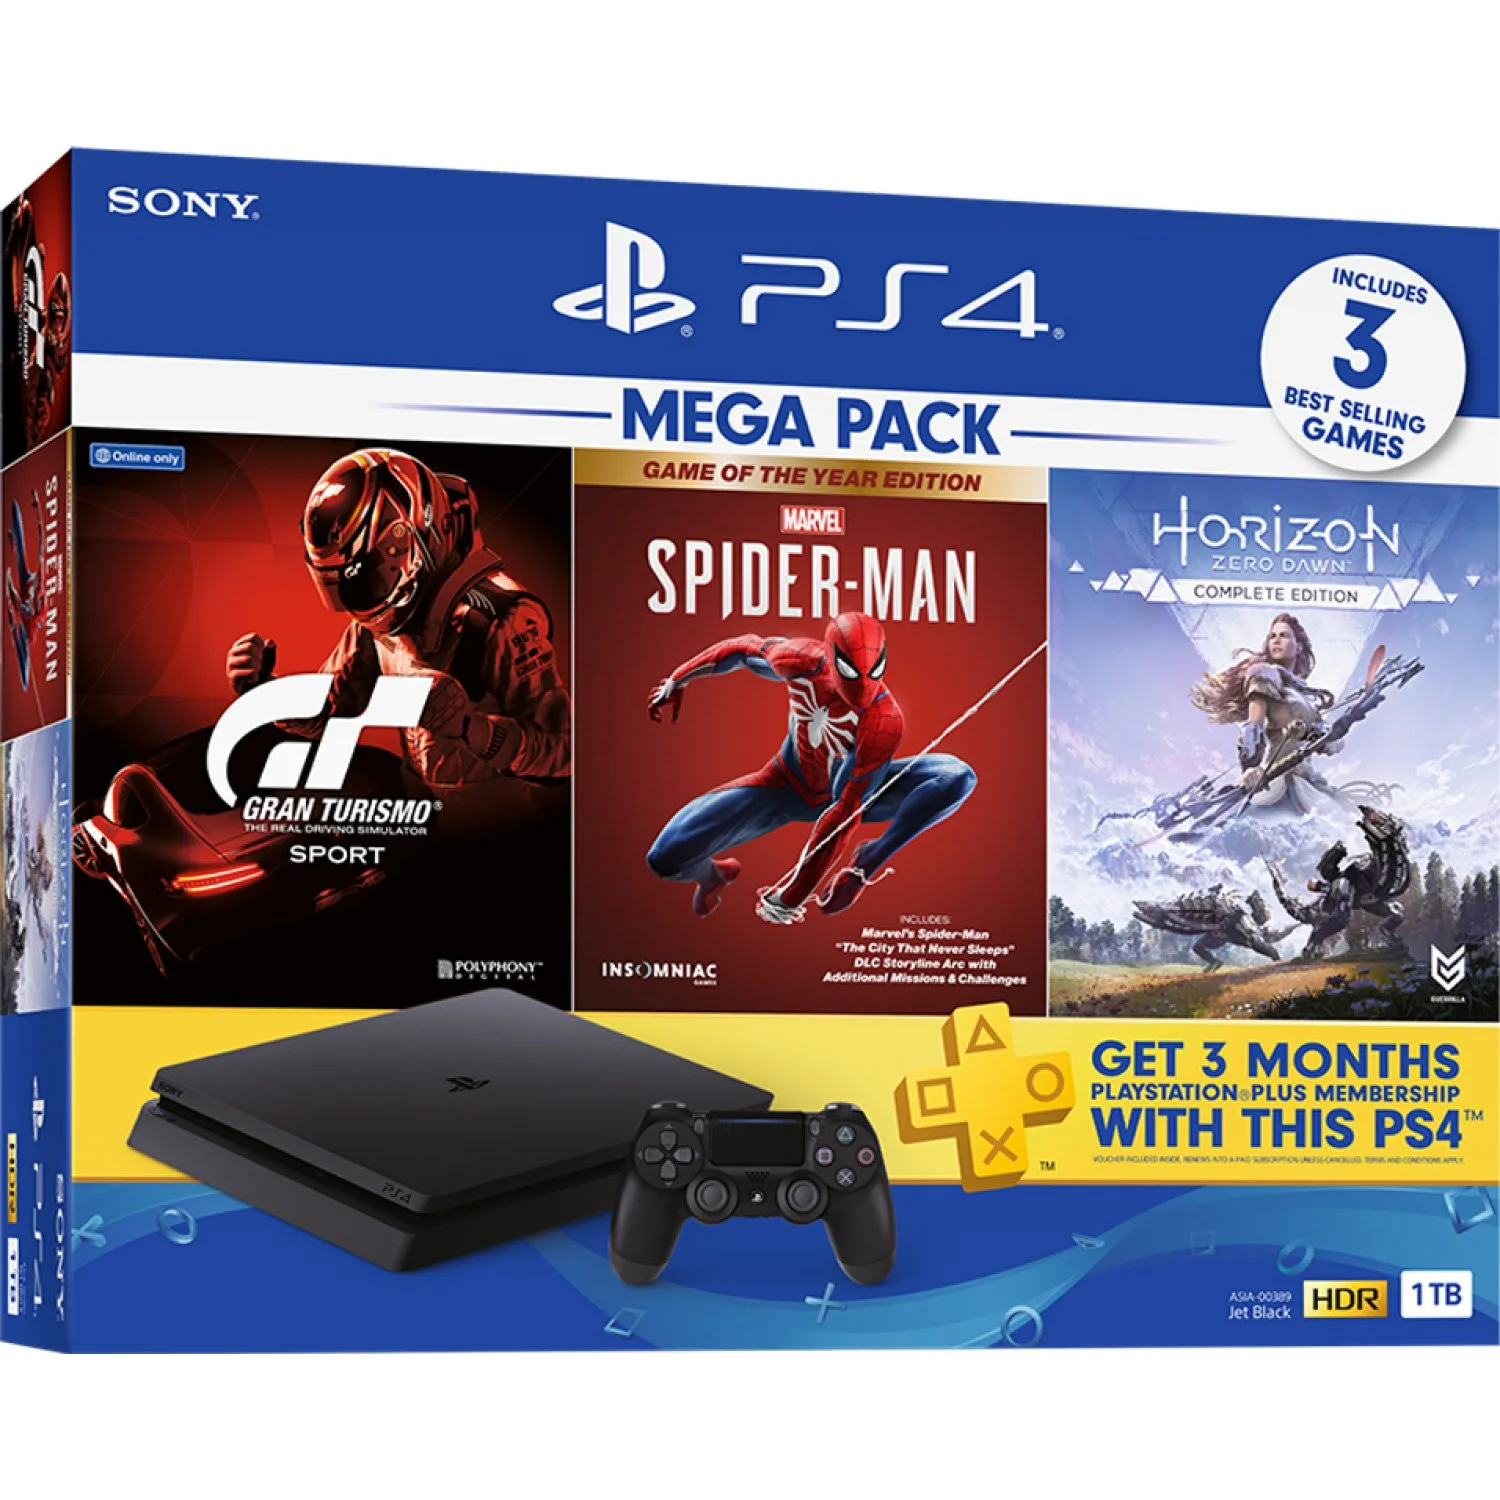 Newest Sony Playstation 4 Slim 1TB SSD Console - Marvel's Spider-Man PS4  Bundle with DualShock-4 Wireless Controller